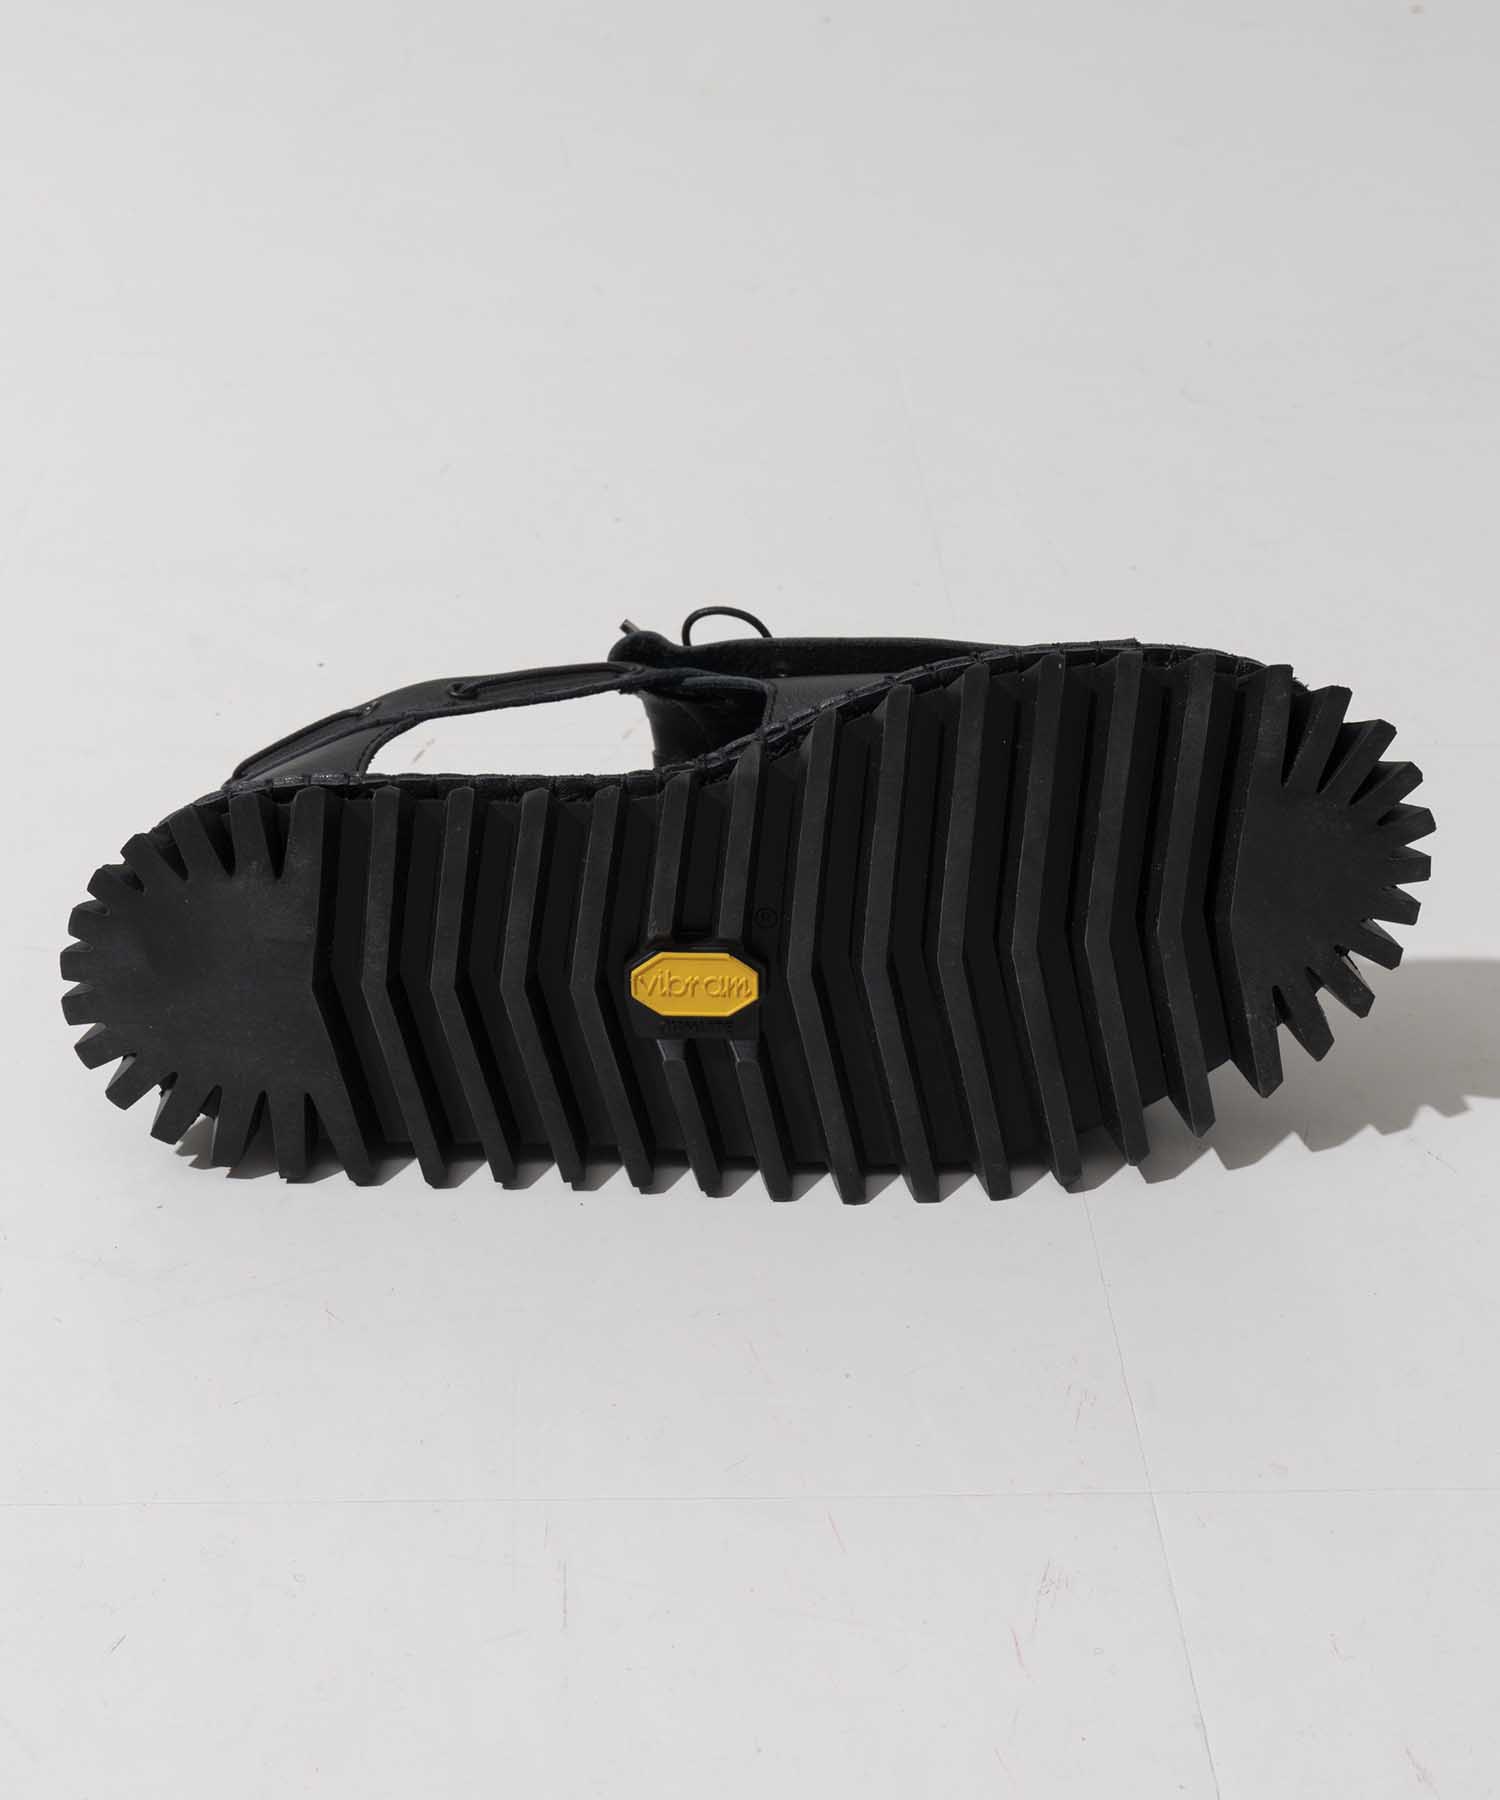 【SPECIAL SHOES FACTORY COLLABORATION】Italian Vibram Sole Tassel Sandal Made In TOKYO